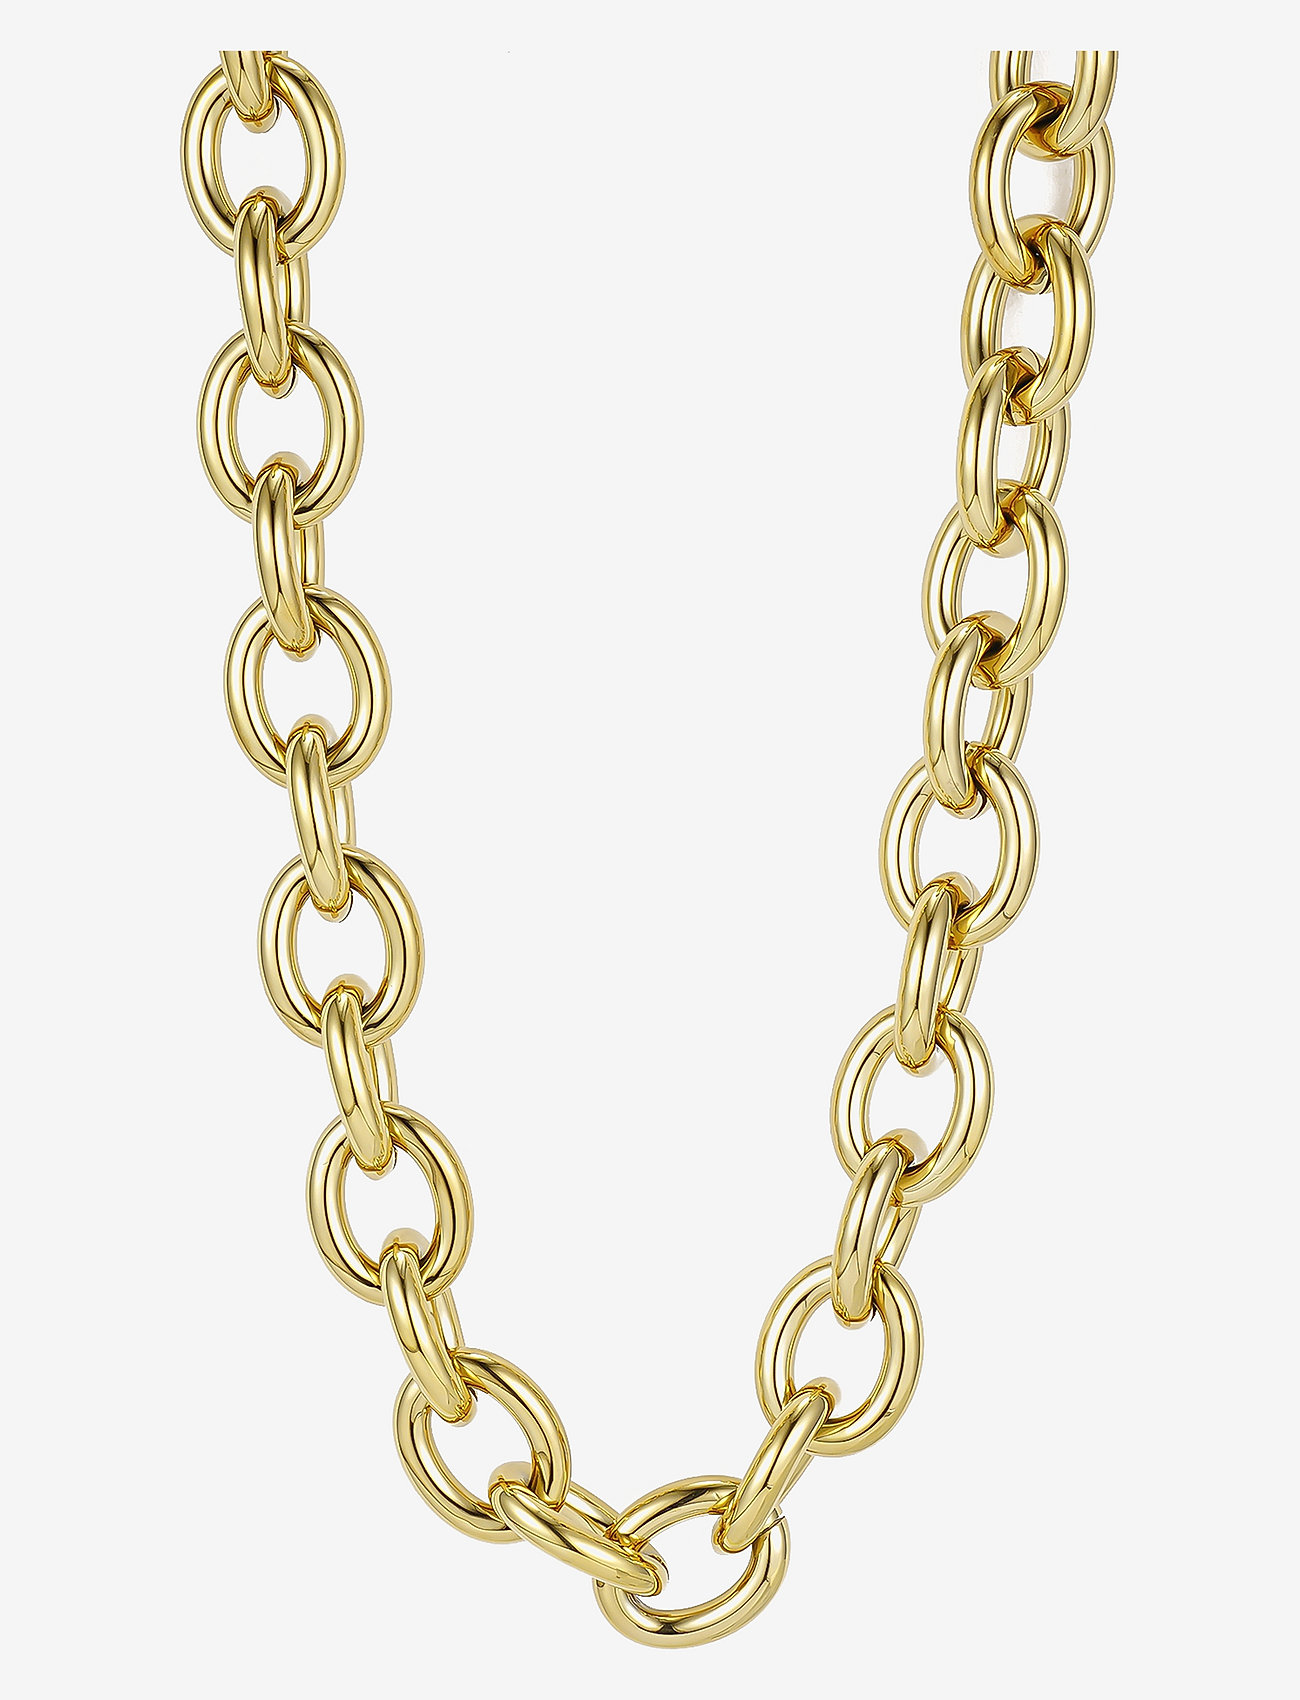 Bud to rose - Monaco Necklace Gold - festmode zu outlet-preisen - gold - 0